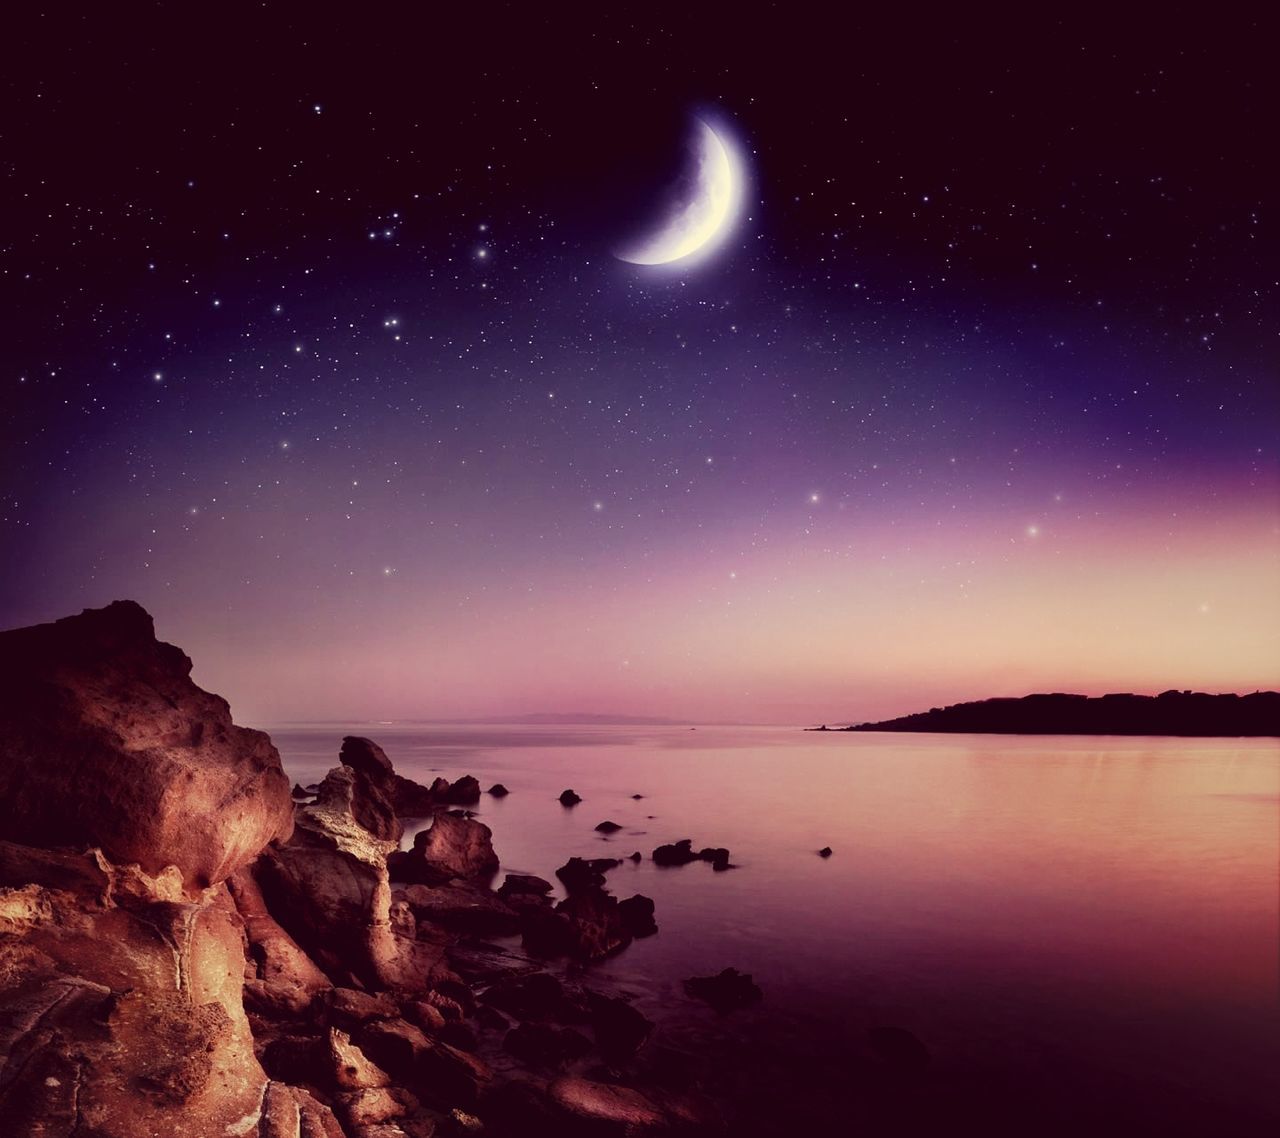 scenics, tranquil scene, tranquility, beauty in nature, night, water, sky, astronomy, star - space, nature, star field, idyllic, majestic, sea, star, galaxy, space, reflection, rock - object, rock formation